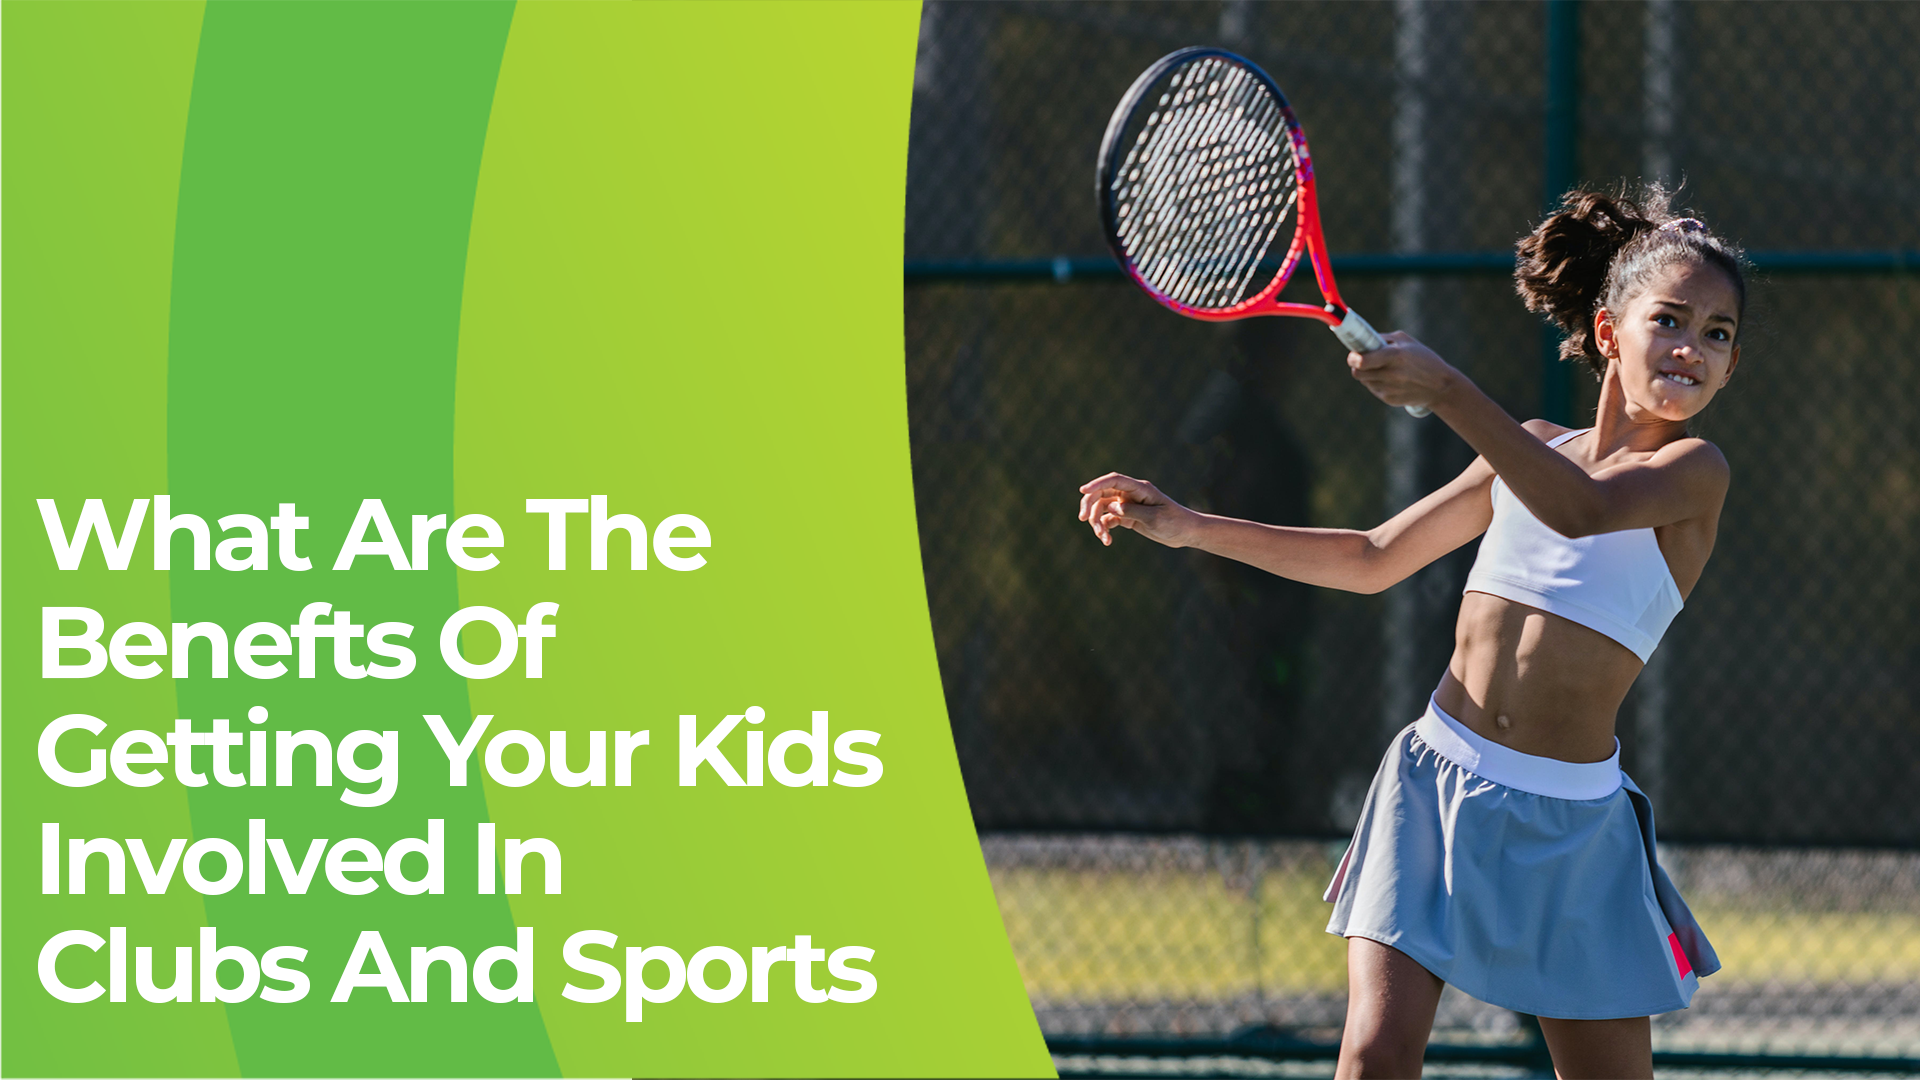 What are the Benefits of Getting Your Kids Involved in Clubs and Sports?